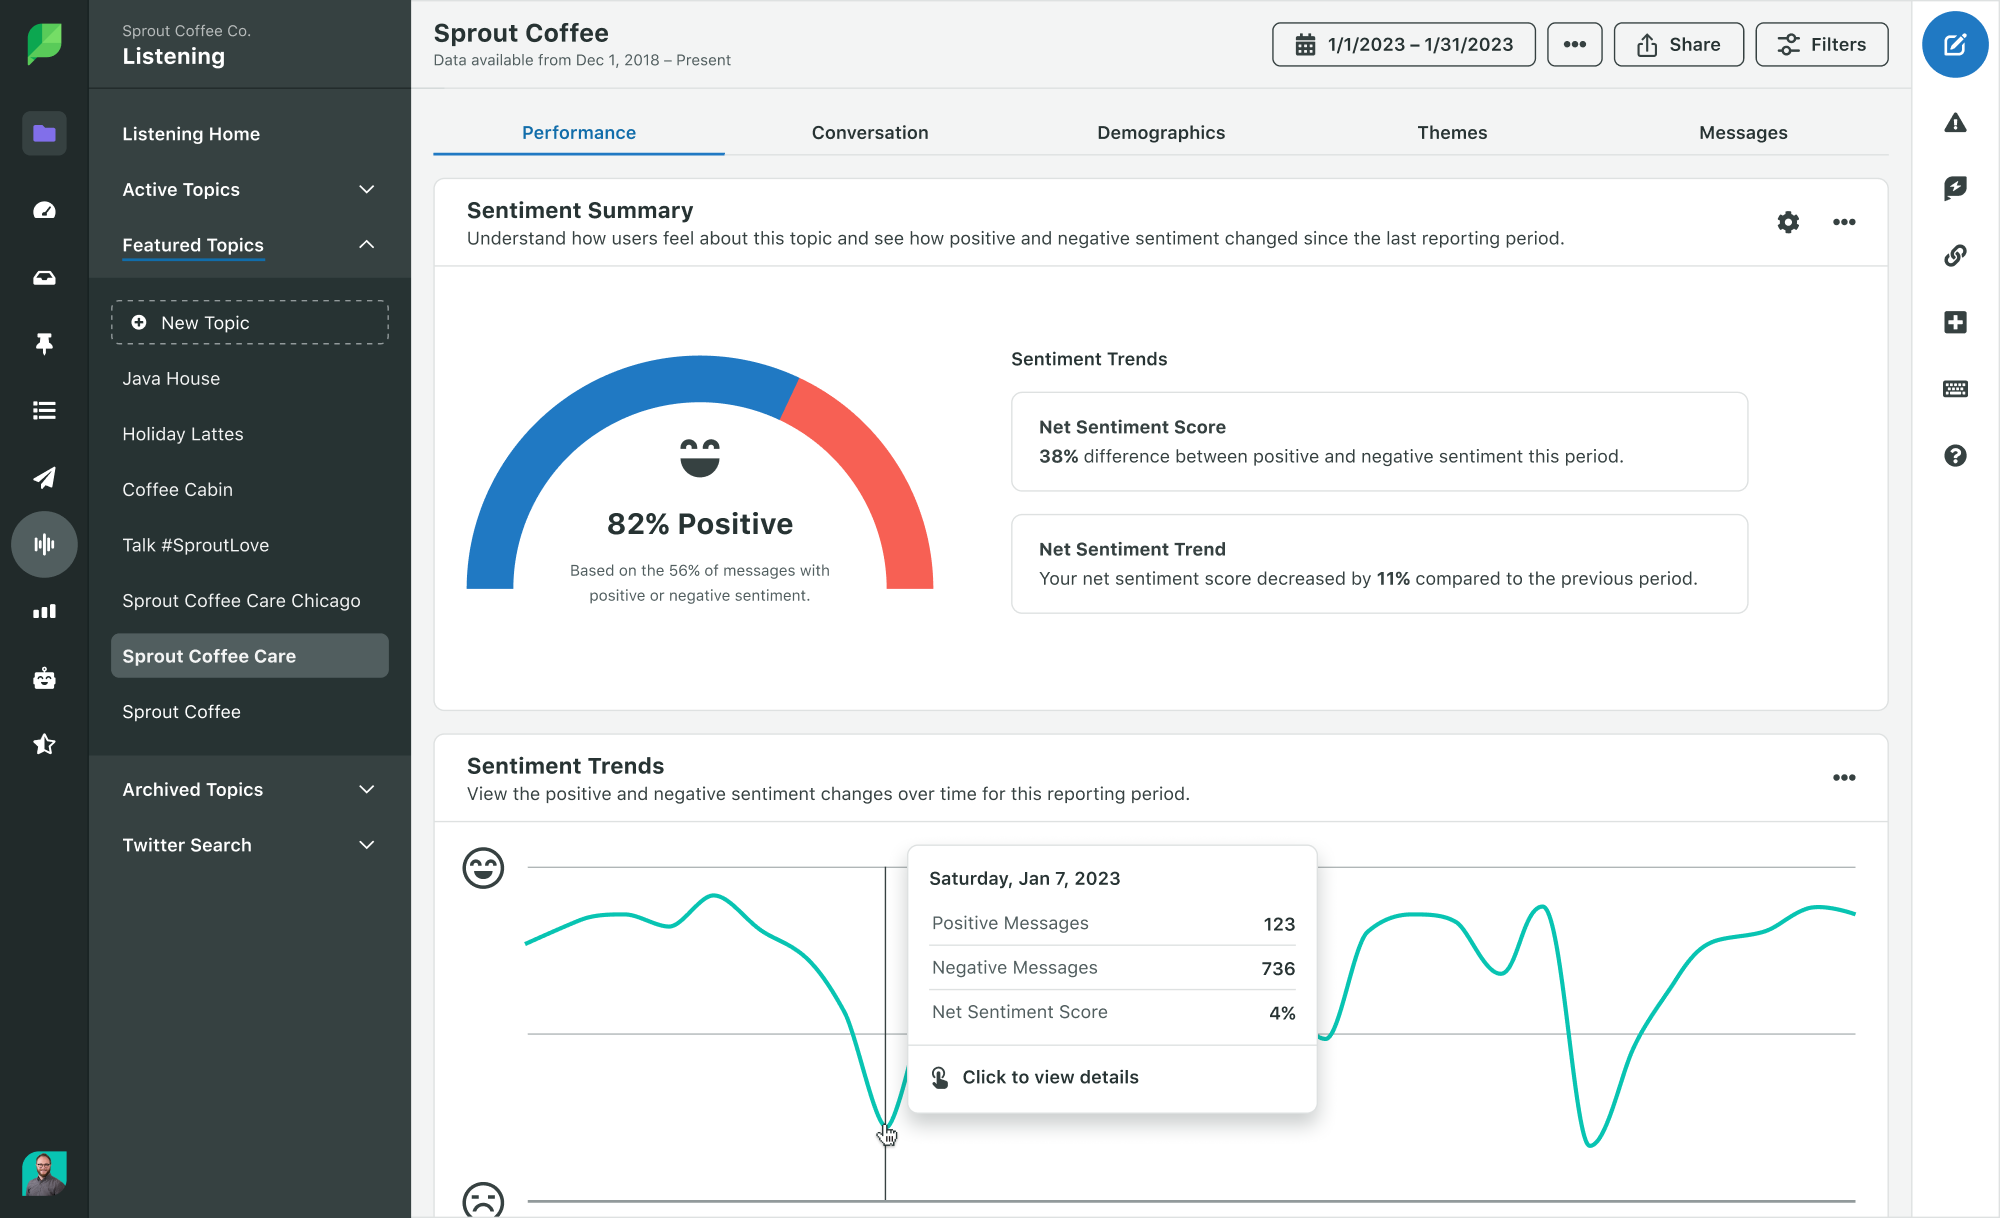 Screenshot of Sprout's sentiment analysis report showcasing negative and positive sentiment trends over time periods including net sentiment scores and net sentiment trends.